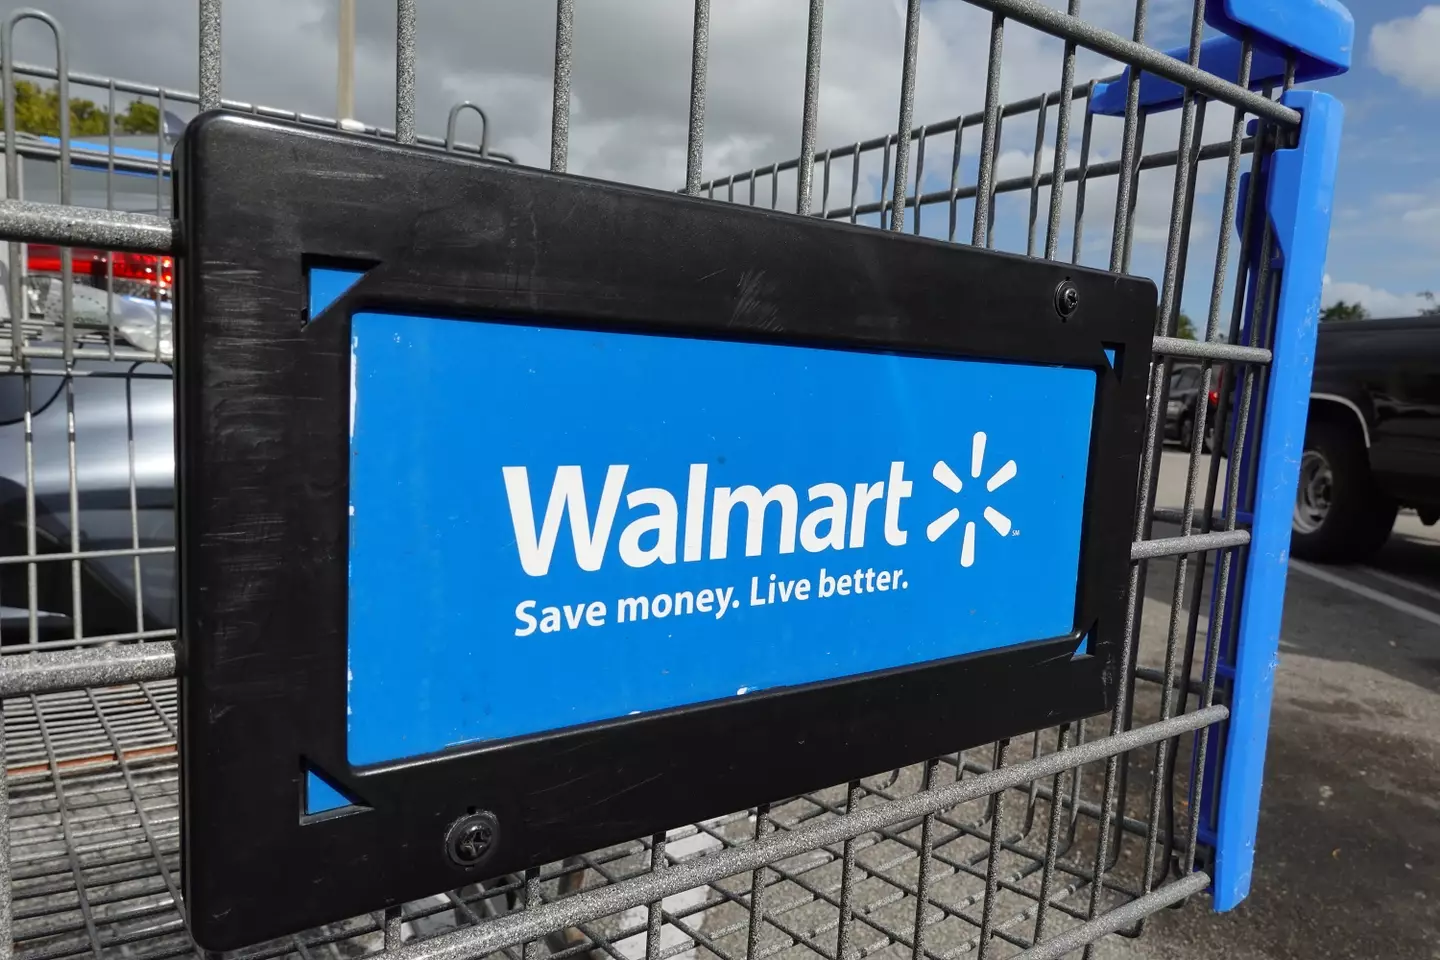 Walmart customers could claim as much as $500.